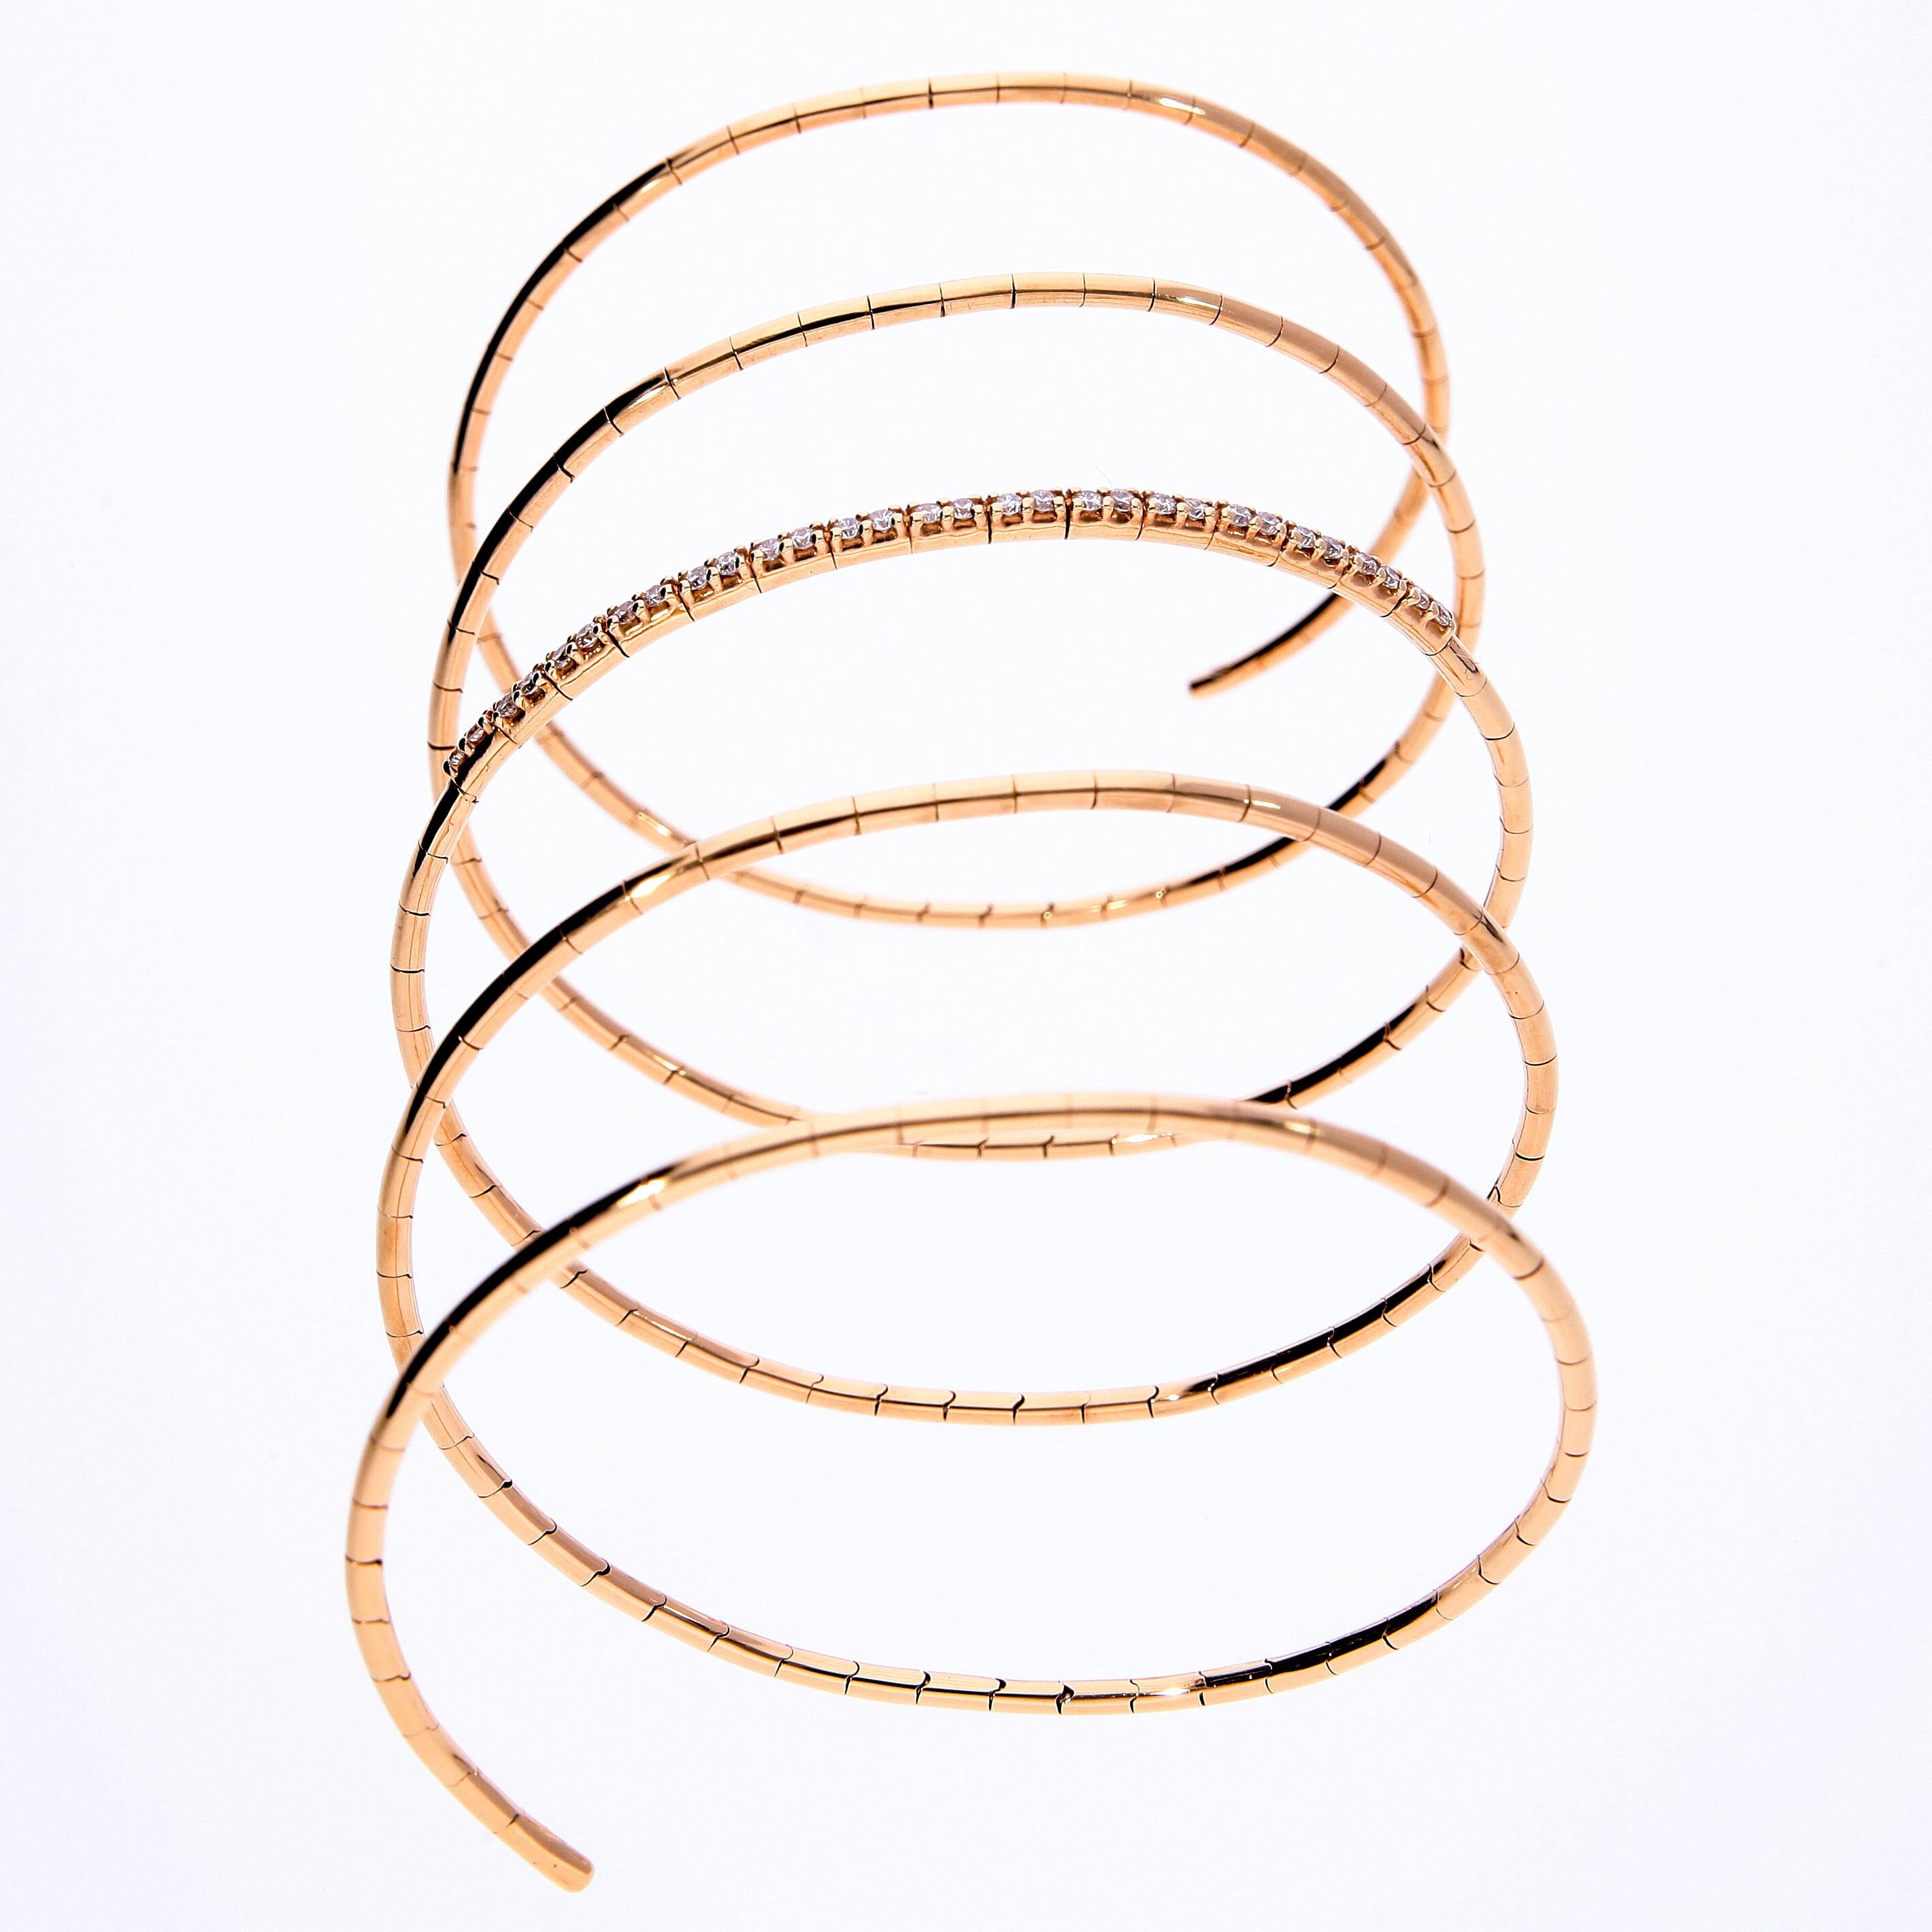 Spiral elastic bracelet, in 18 Kt rose gold with five rows, one of which with a row of diamonds.
Total Diamonds Weight: ct. 0.54
Total Weight of 18 Kt Gold: 23.7 grams
THE MANUFACTURE IS MADE IN ITALY

•THE JEWEL IS IN 18 KT GOLD

•EACH ITEM IS SOLD